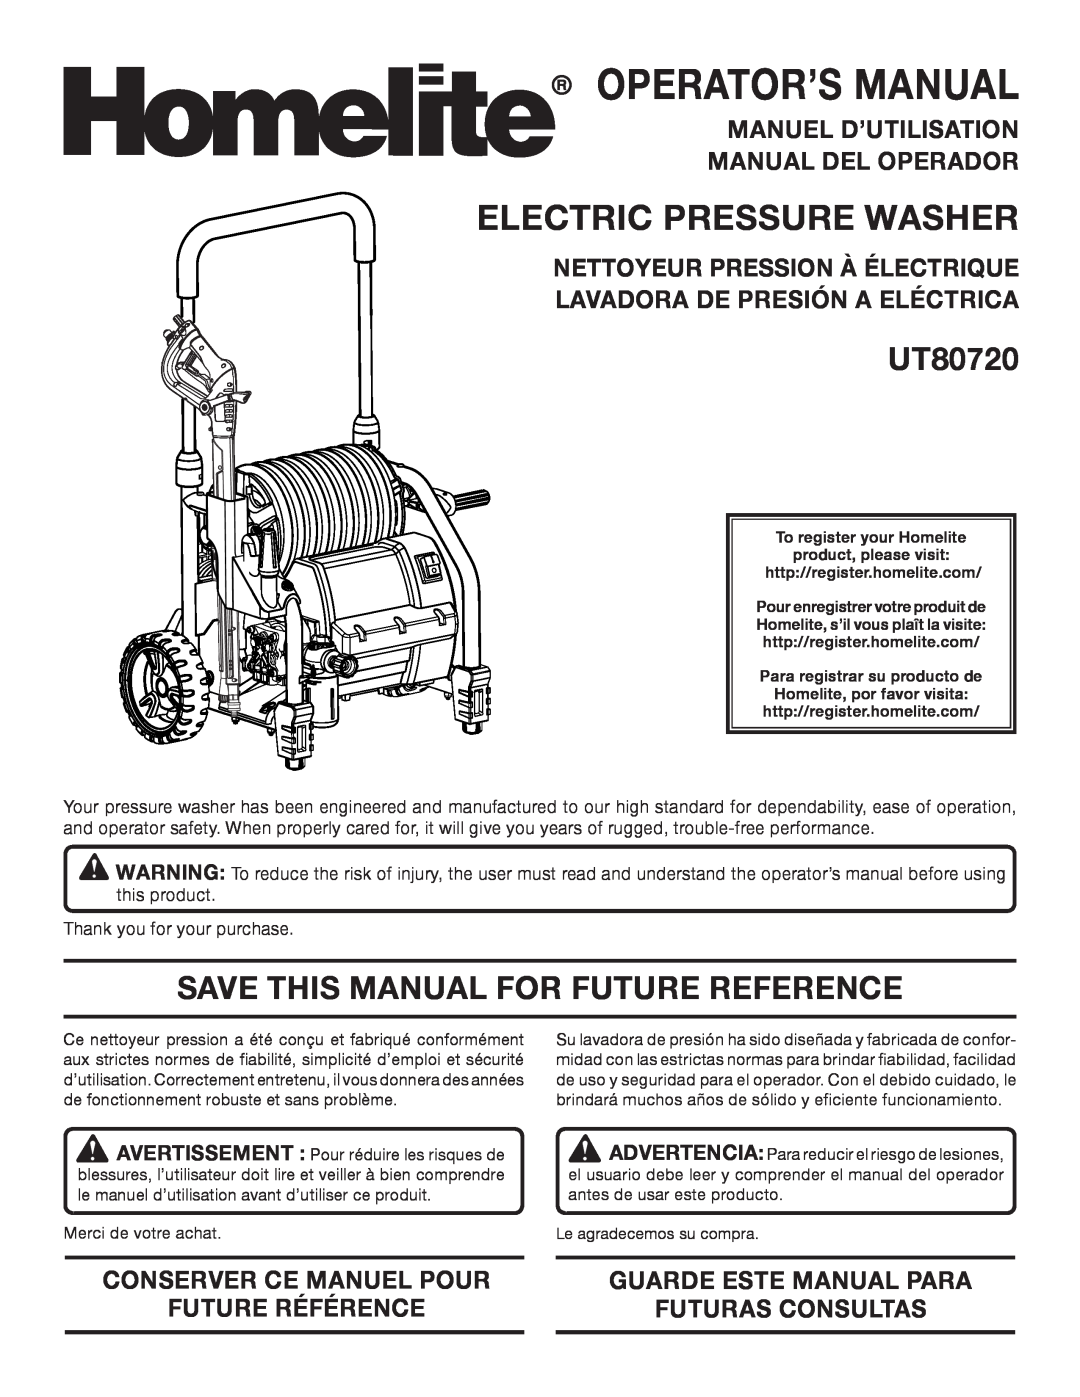 Homelite UT80720 manuel dutilisation Electric Pressure Washer, Save This Manual For Future Reference, Future Référence 